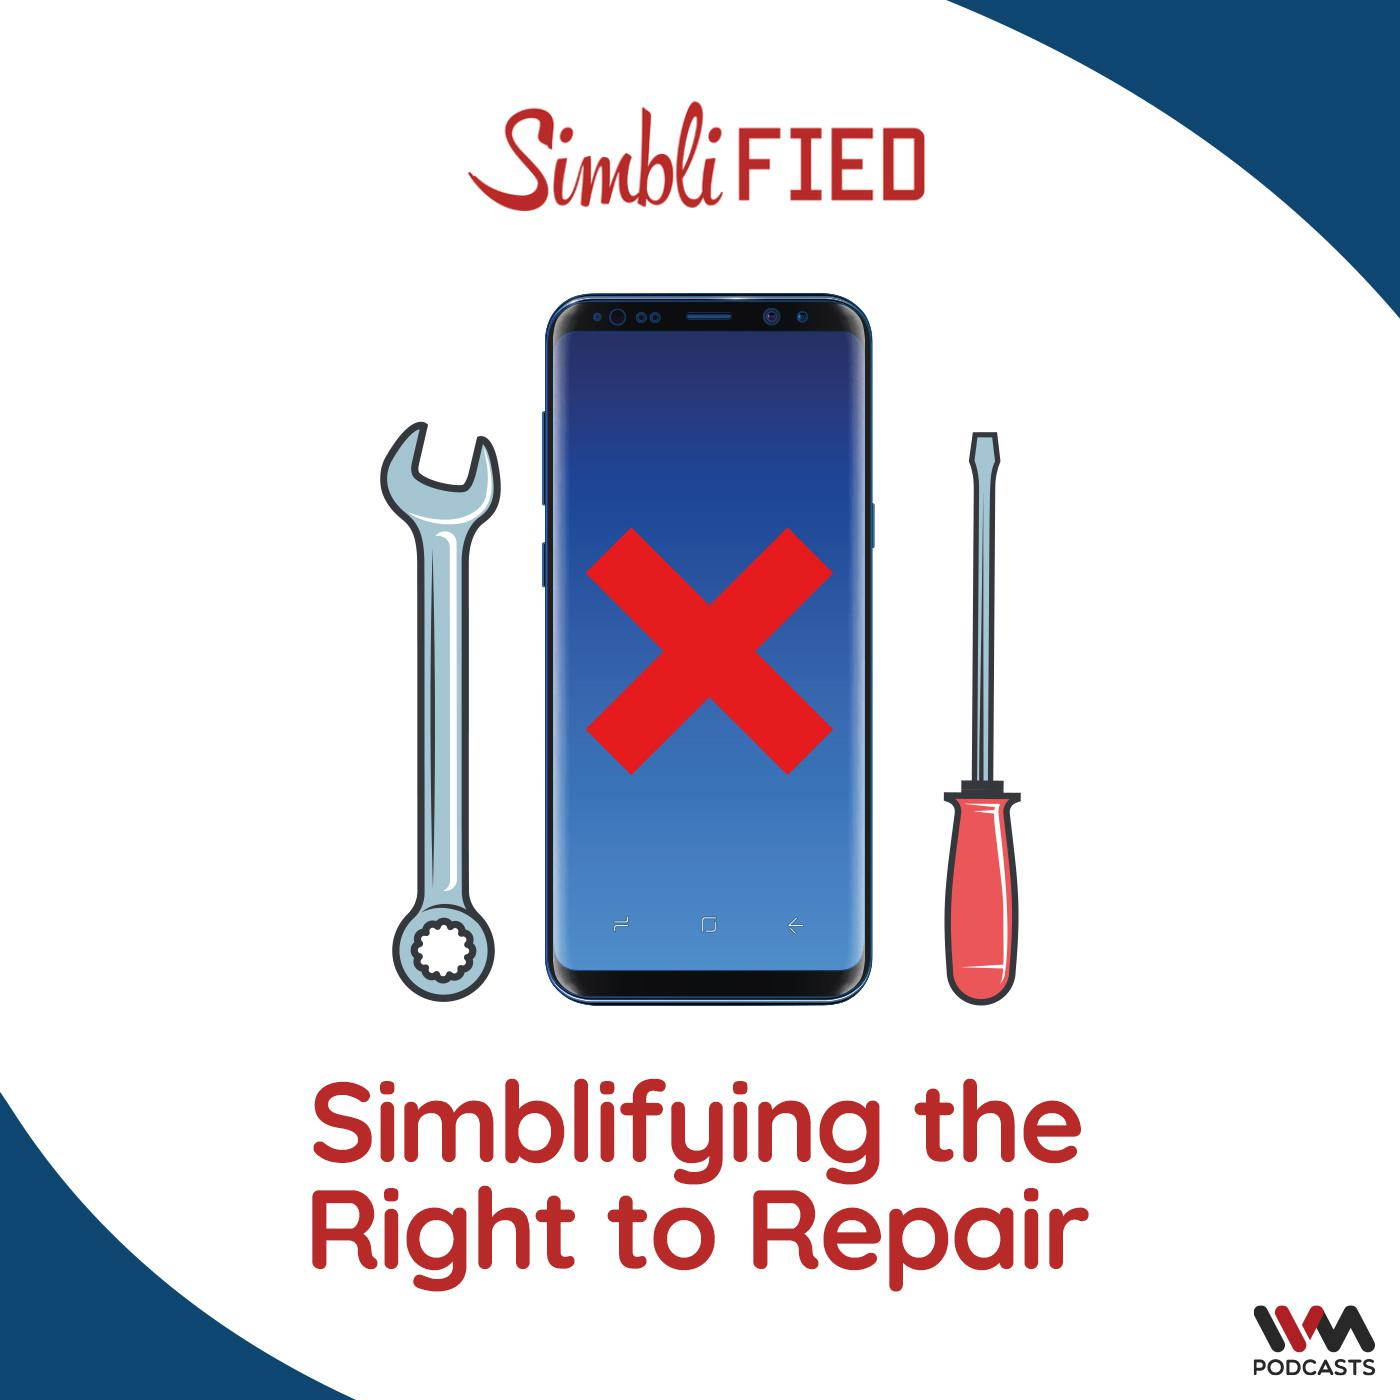 Simblifying the Right to Repair